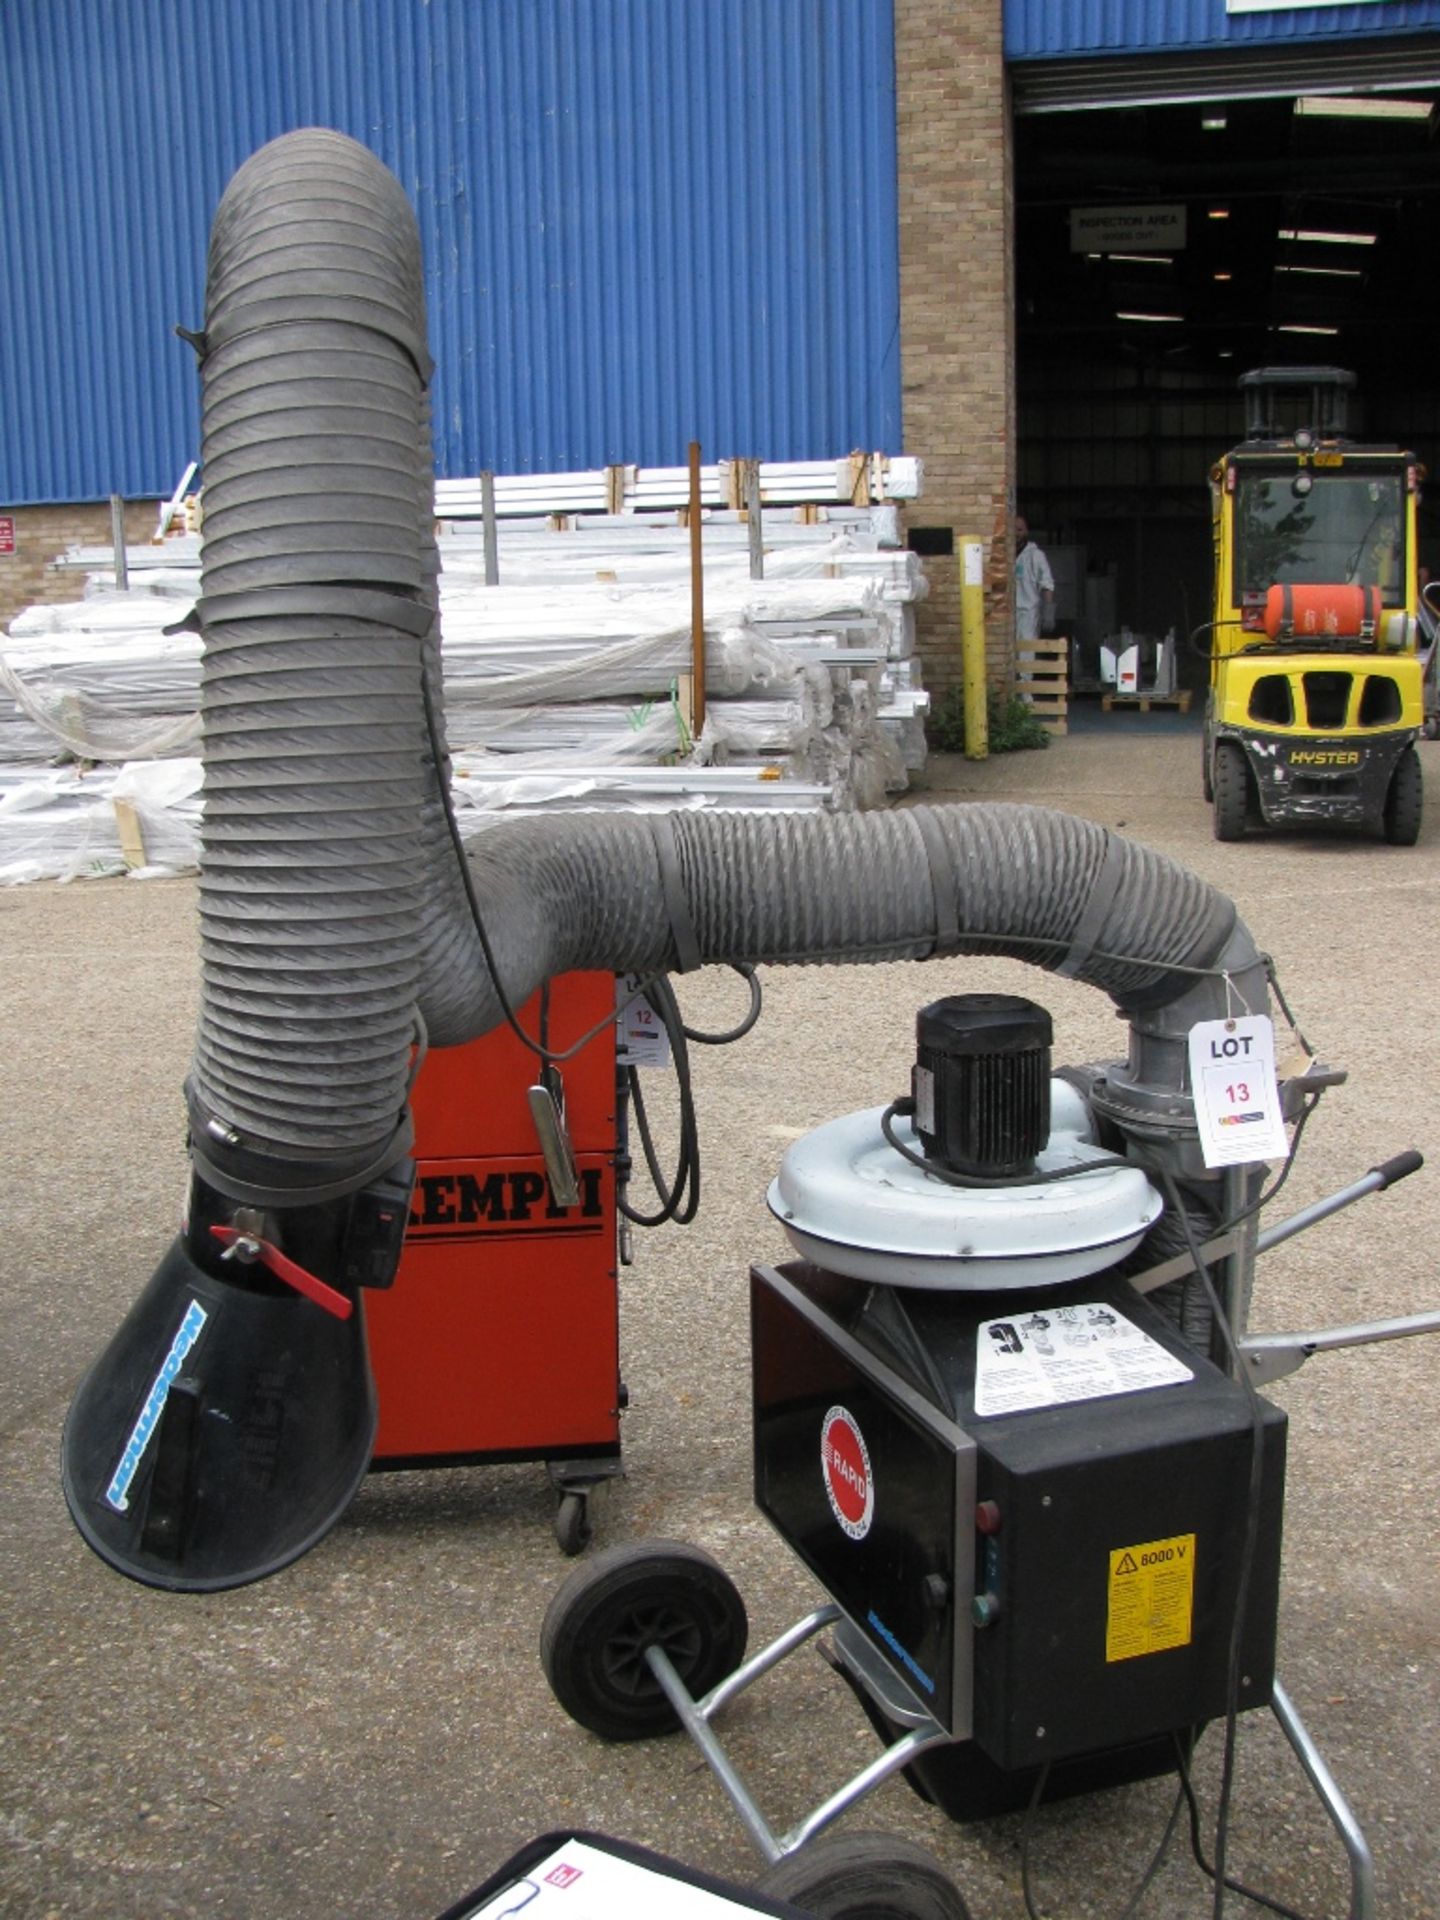 Nederman portable fume extractor - 240V s/n 662 Located: Chandlers Ford, Hampshire Contact: Barry